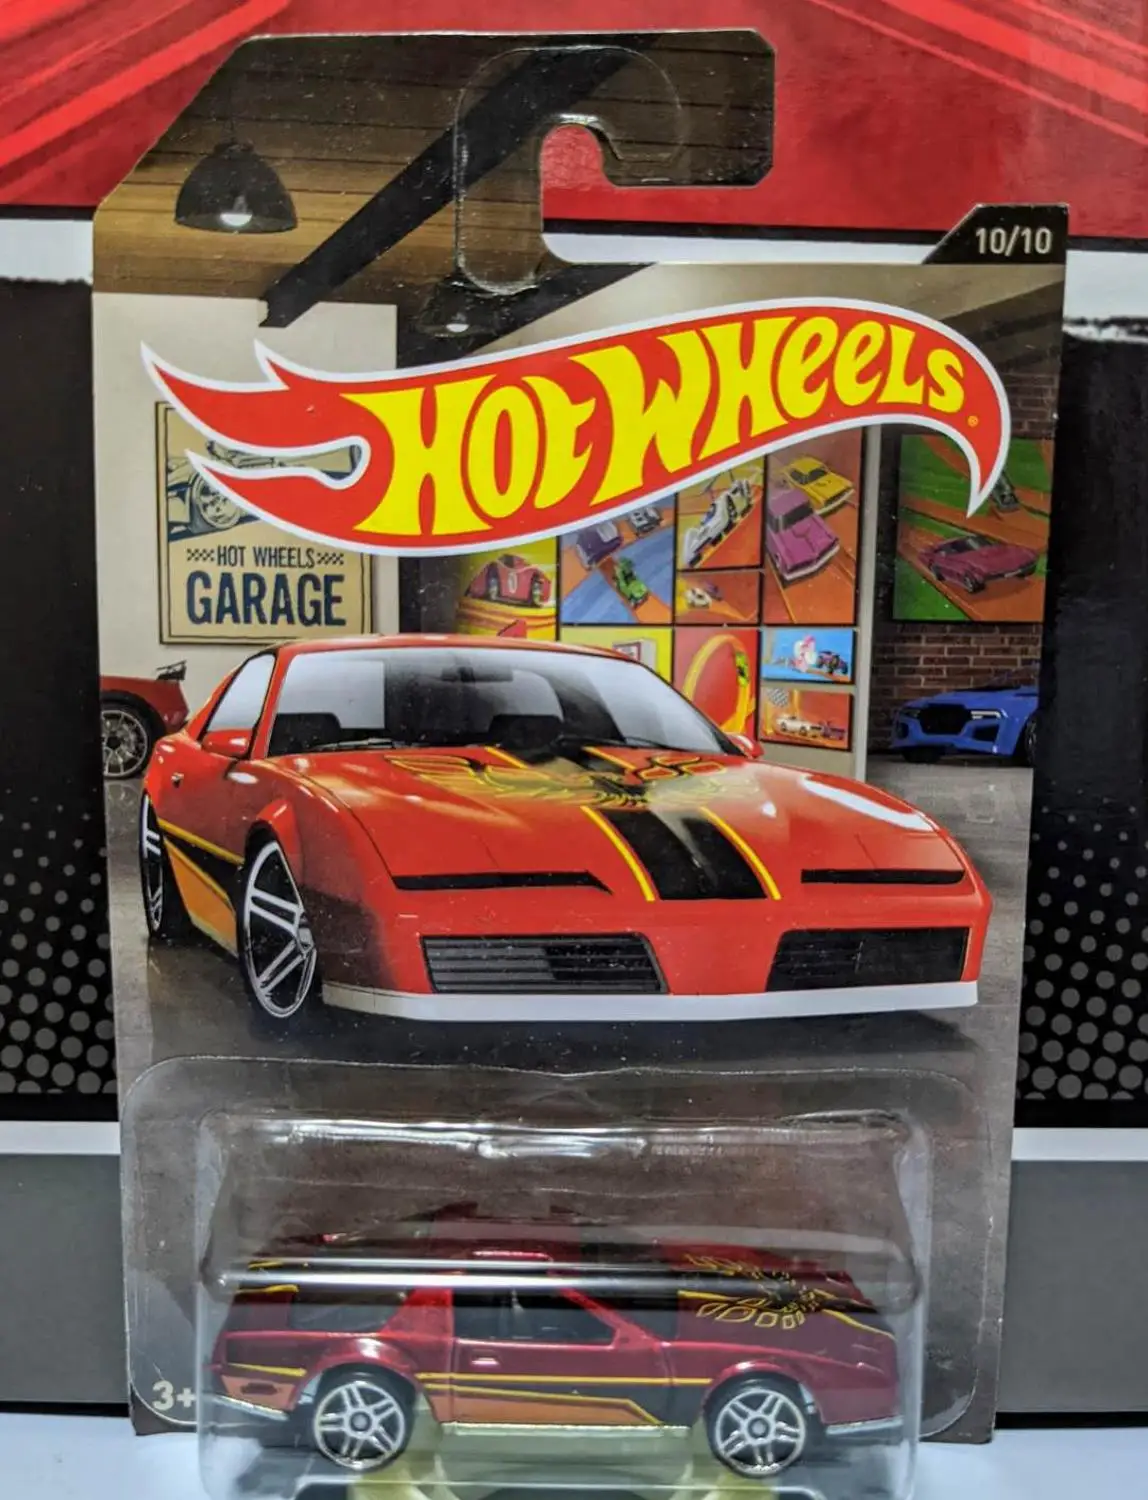 

HOT WHEELS Cars 1/64 Garage 57 Cadillac 80s Pontiac 70 Dodge Ford Collector Edition Metal Diecast Model Car Kids Toys Collection